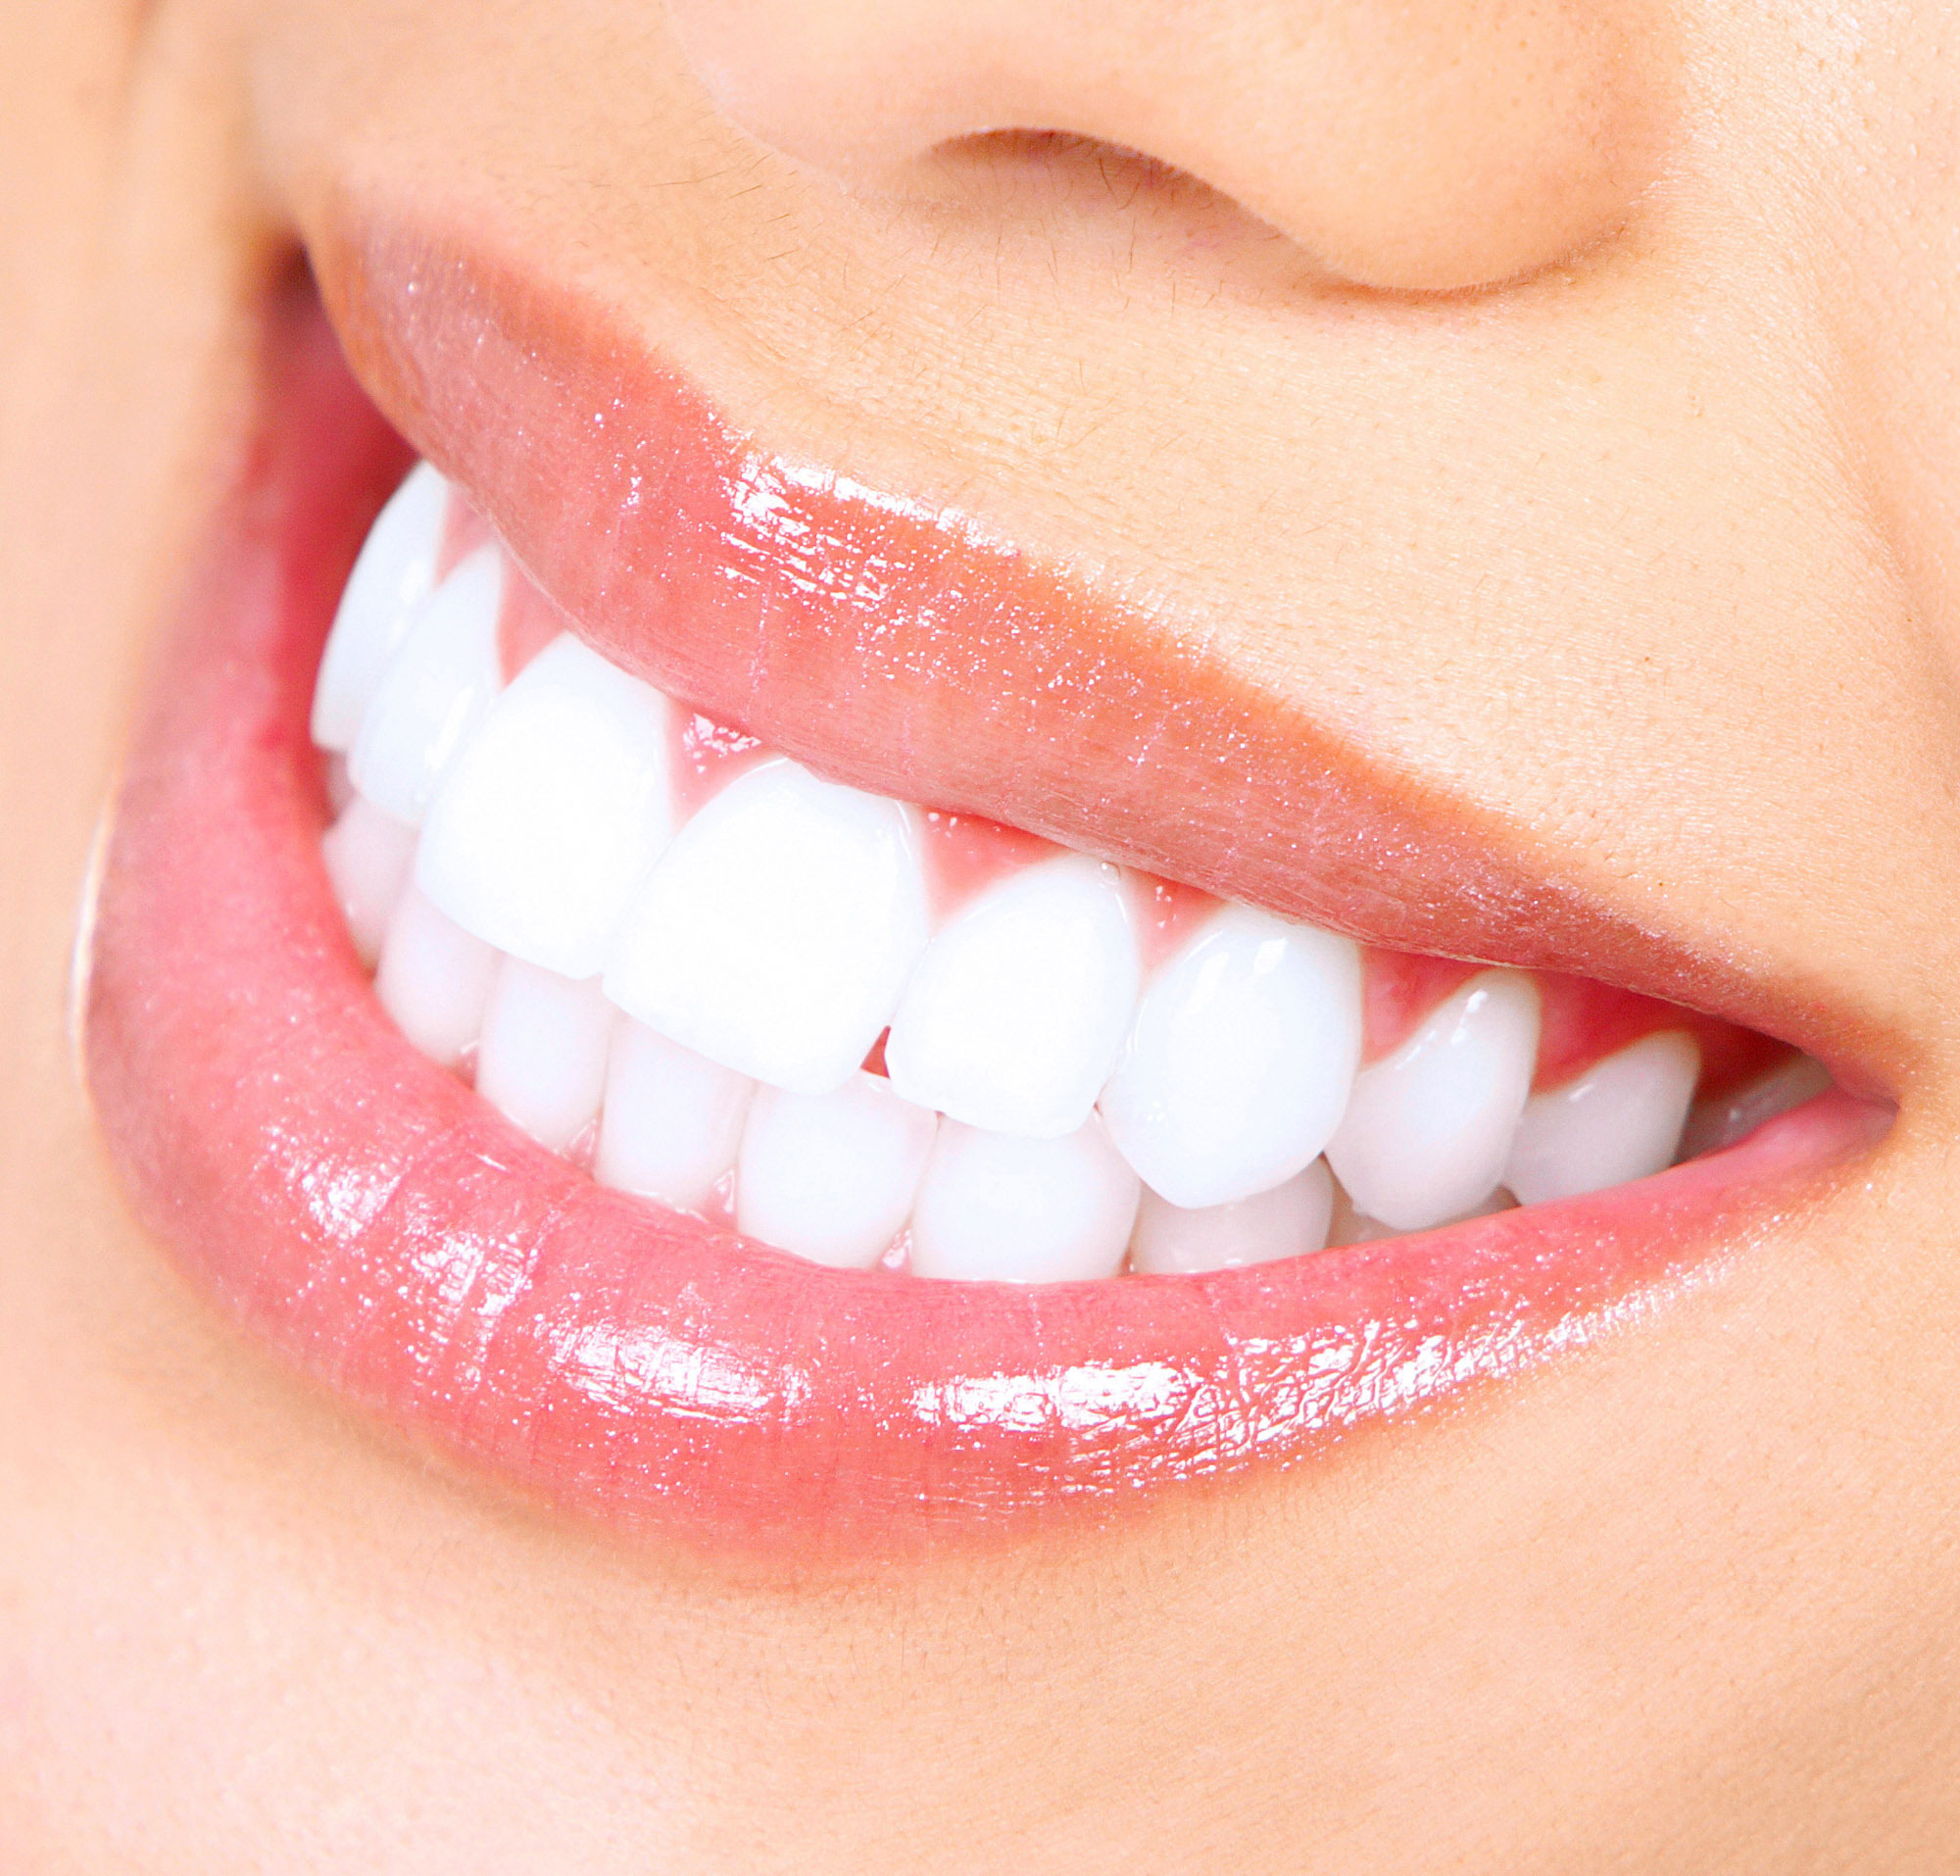 white teeth smiling with healthy gums